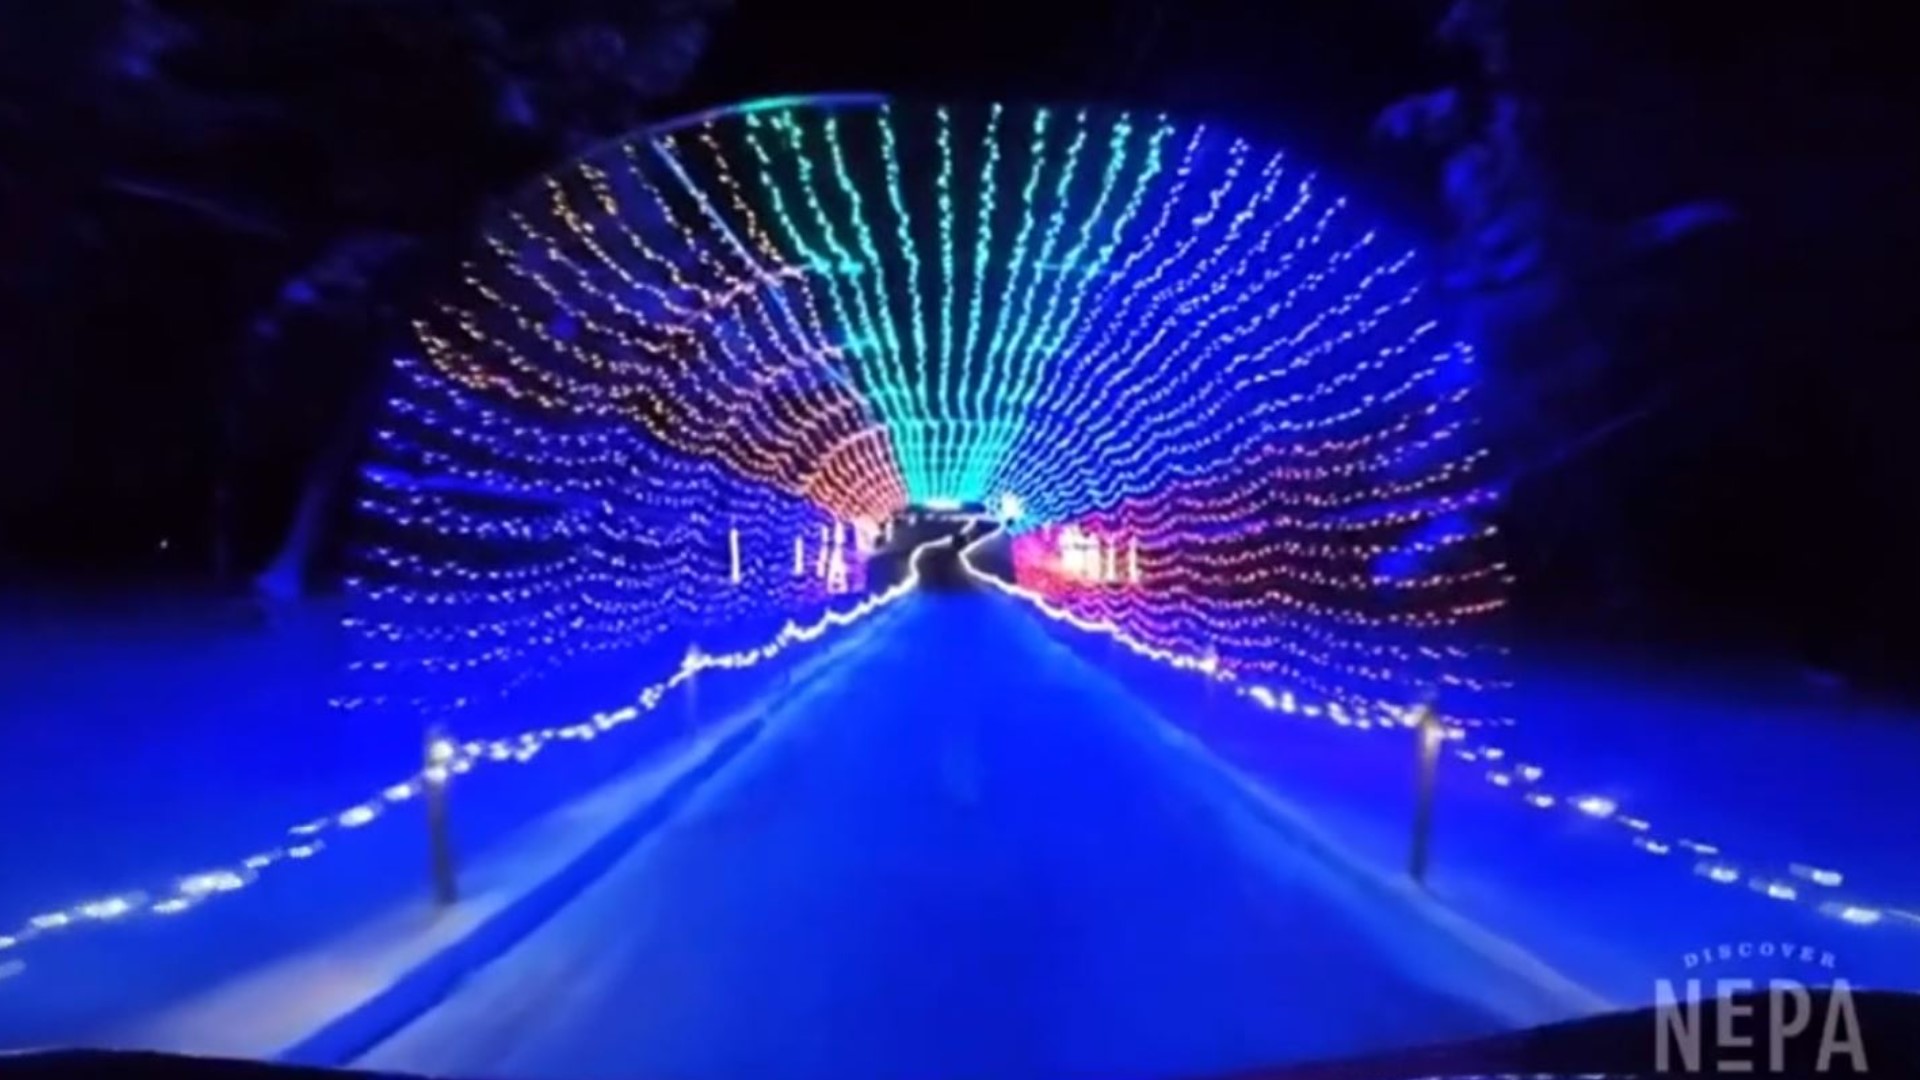 Drive-thru holiday displays prove extra popular during the pandemic.